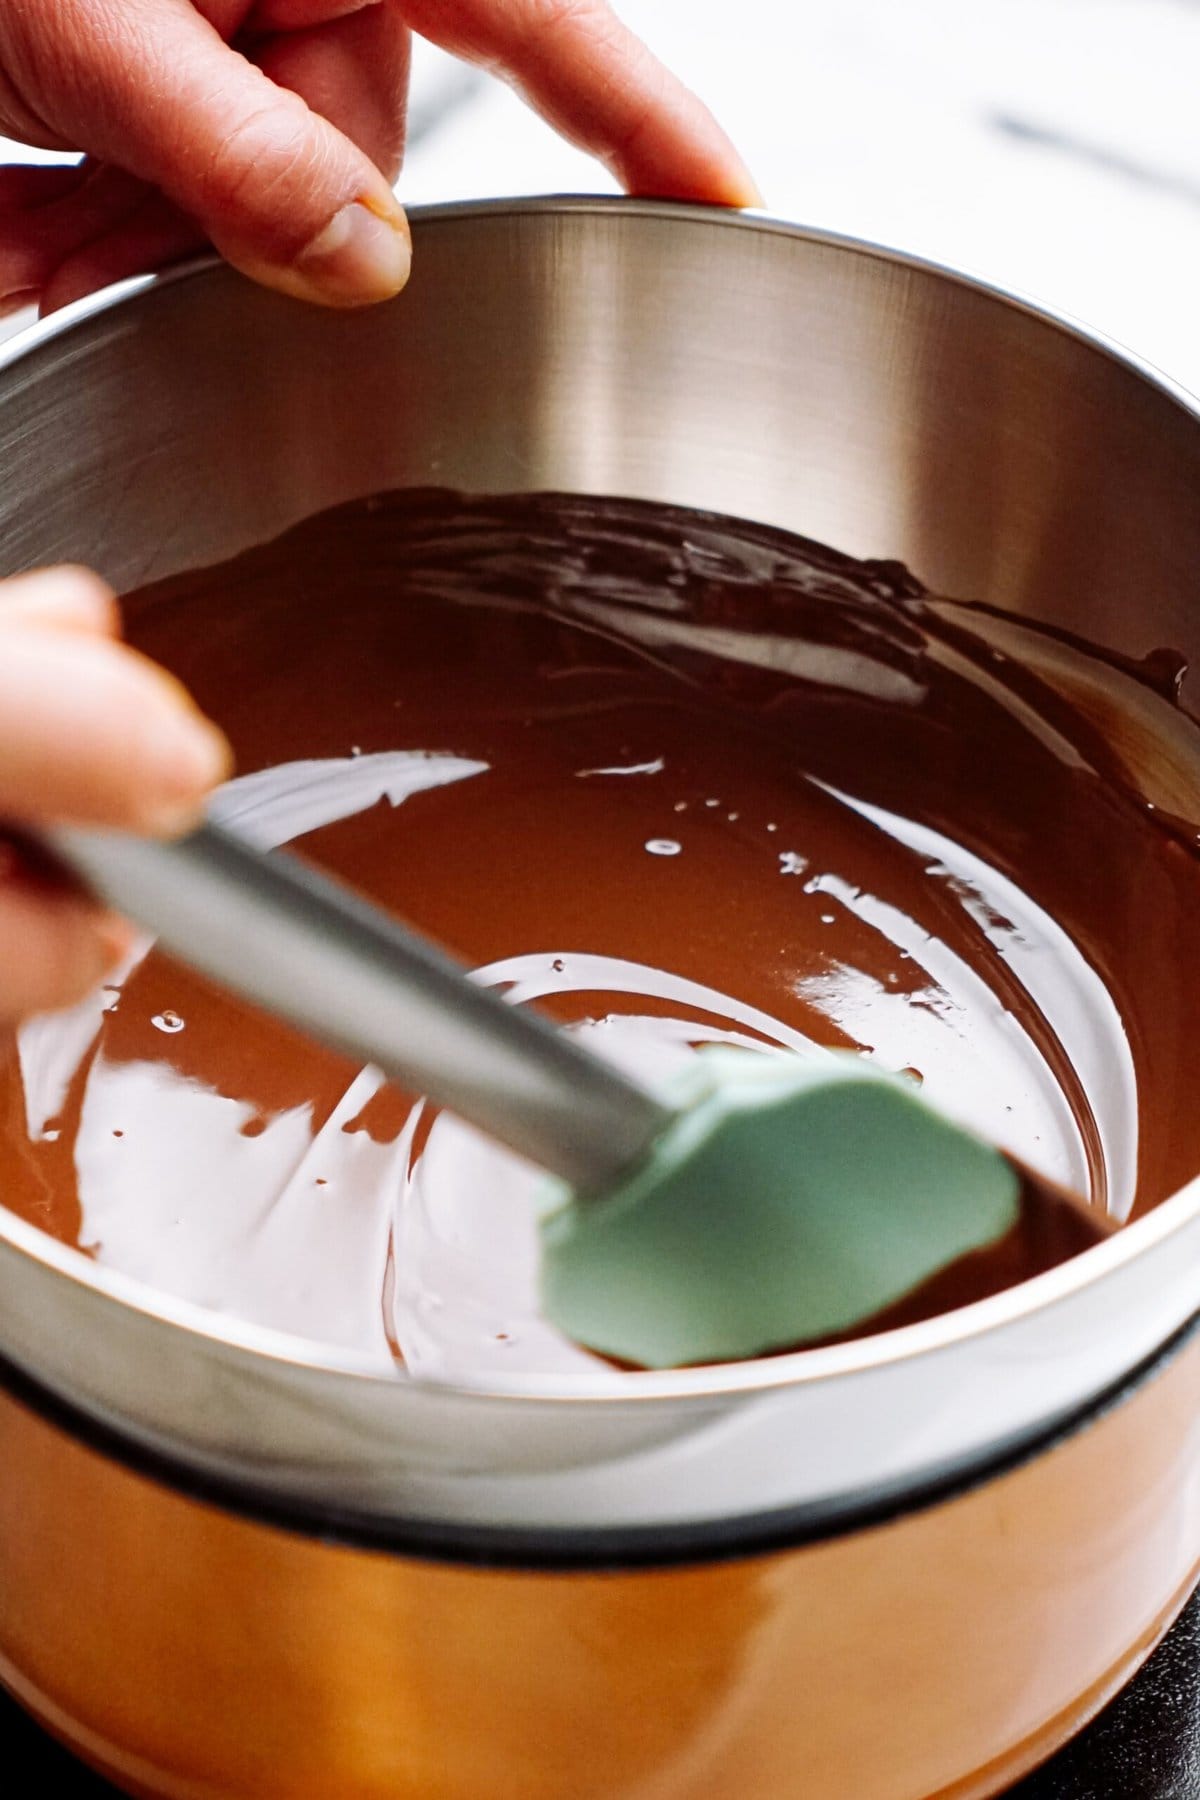 A person stirring melted chocolate a bowl.